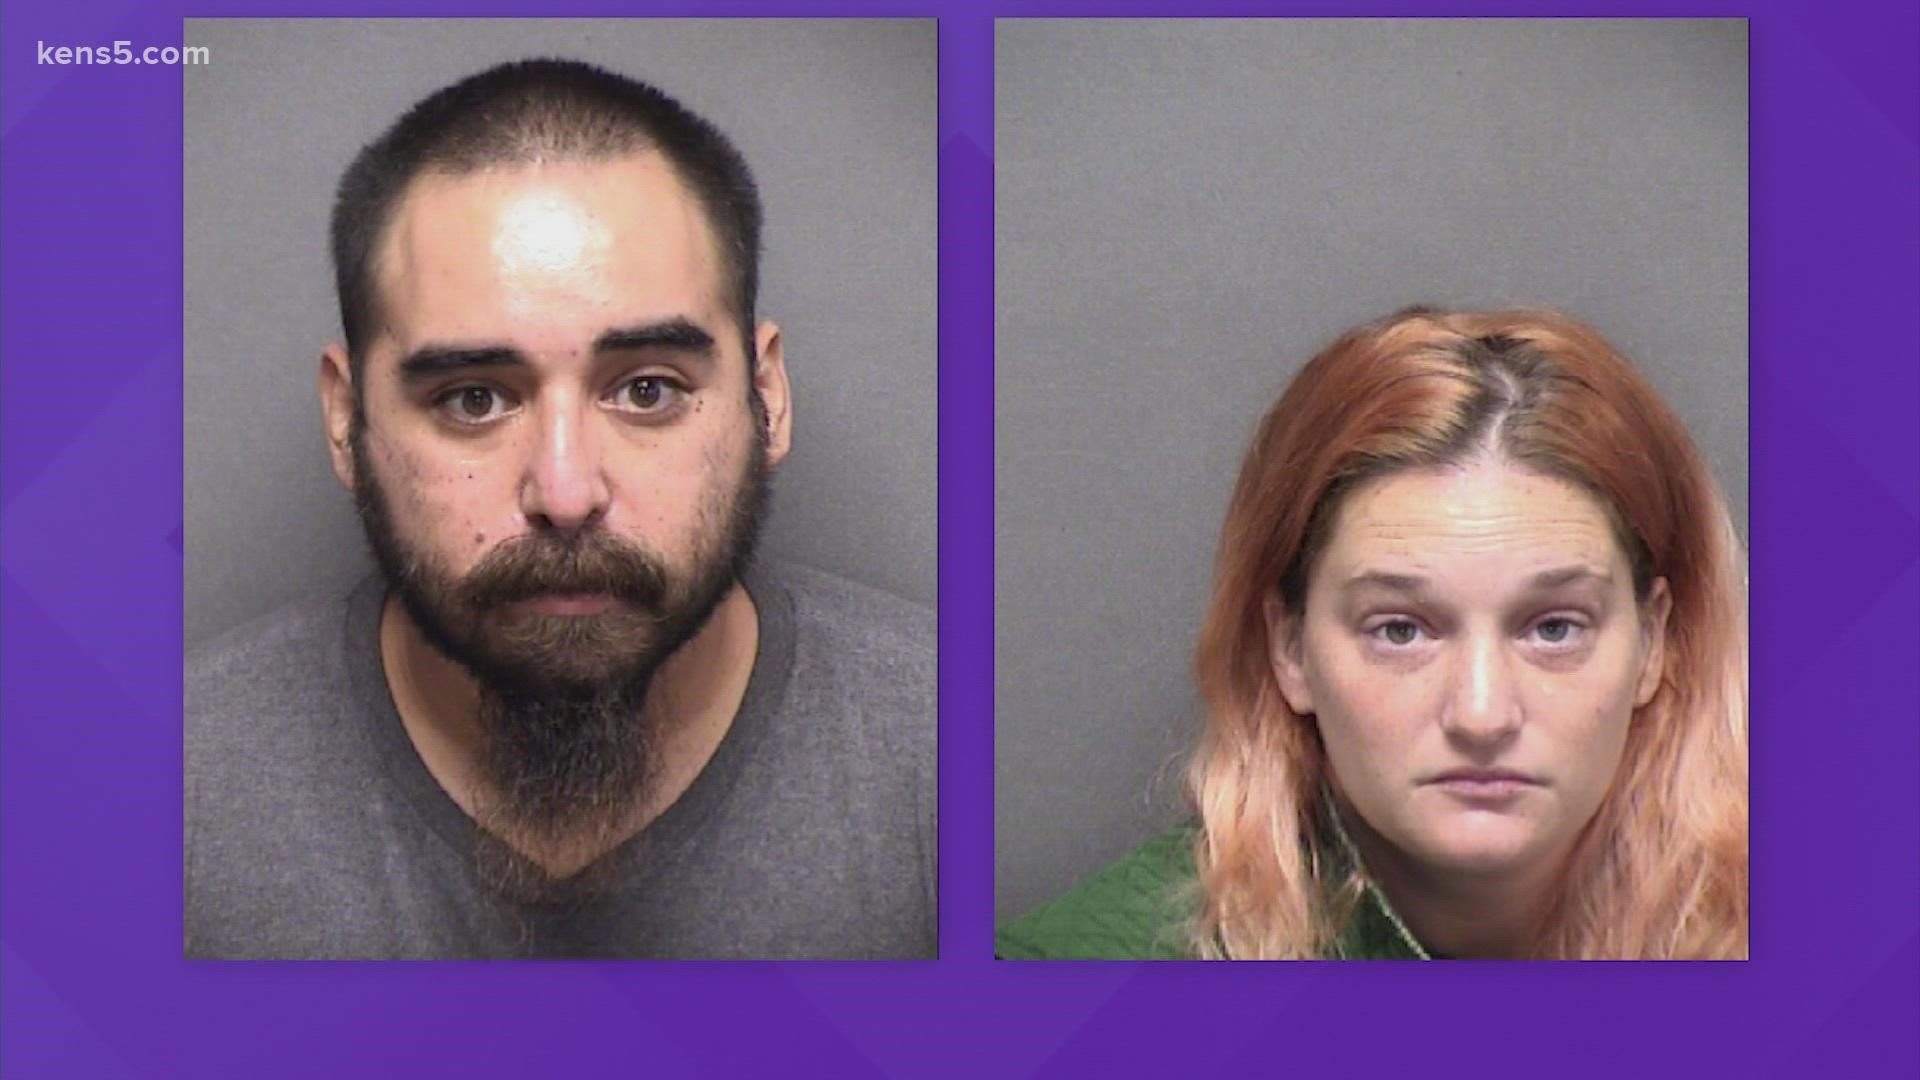 Couple facing several child sex charges, investigators fear there may be more victims kens5